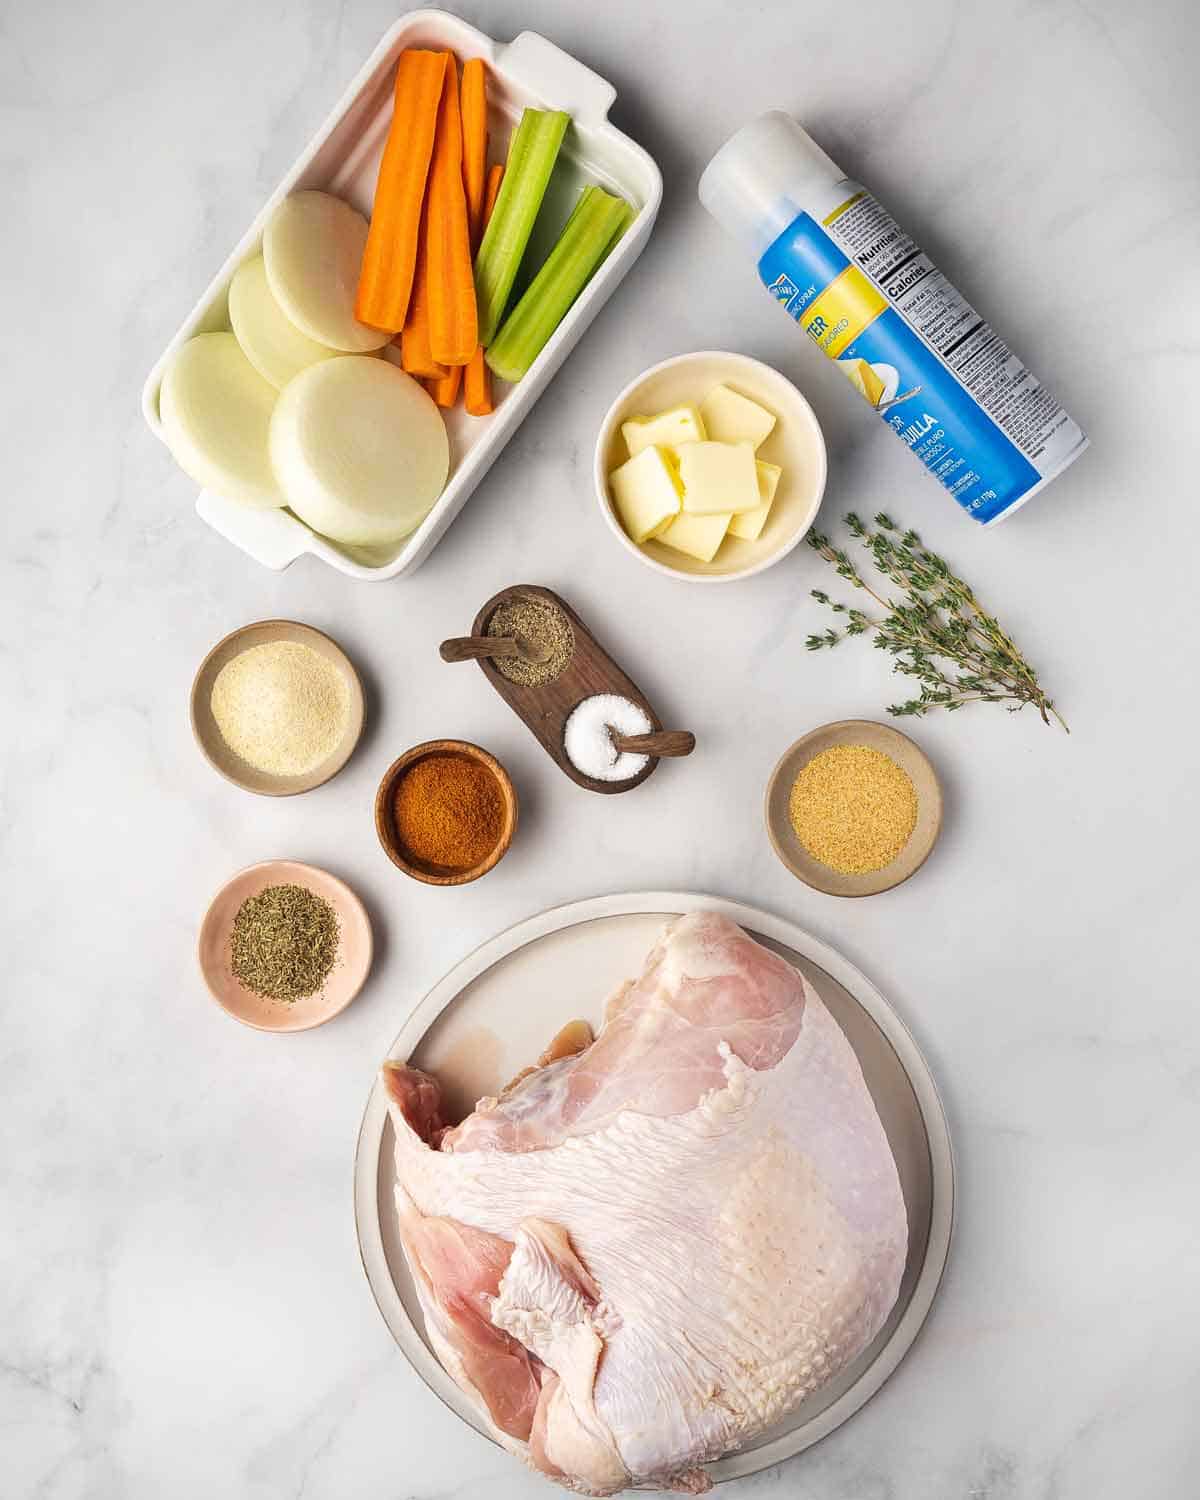 Ingredients needed to make a slow cooker turkey breast.